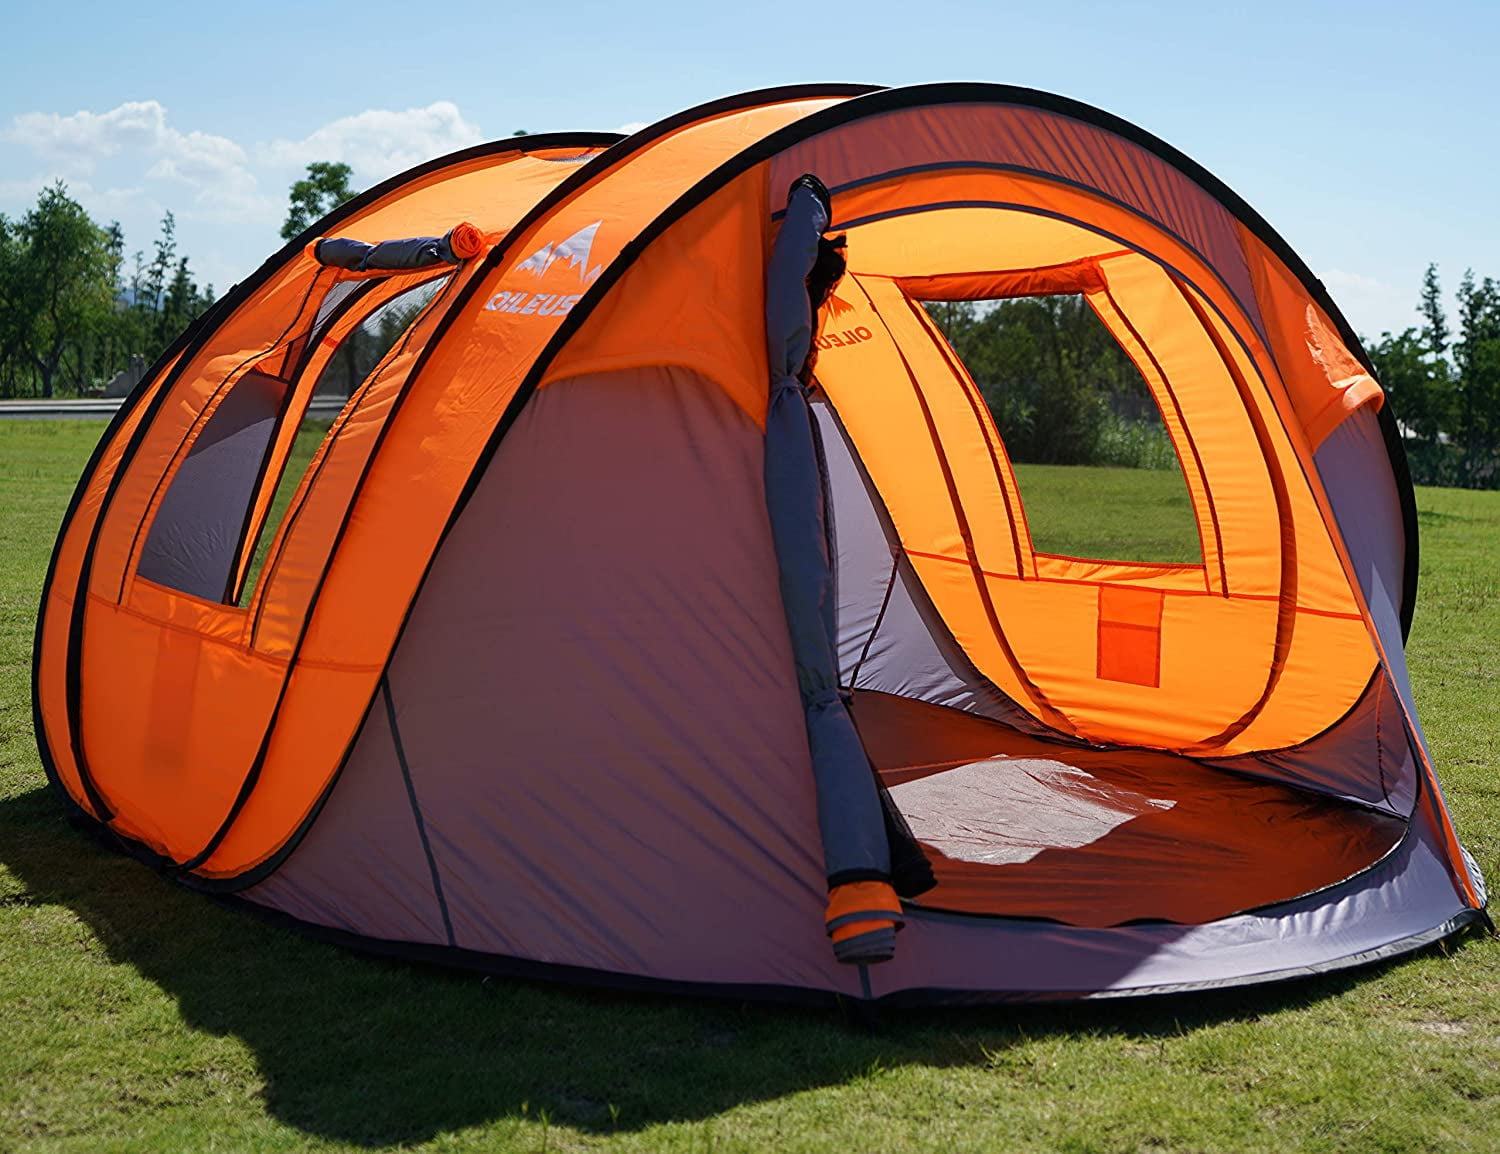 Lightweight Outdoor Family Camping Tent with Carry Bag Coleman Instant Dome 5-Person Capacity 